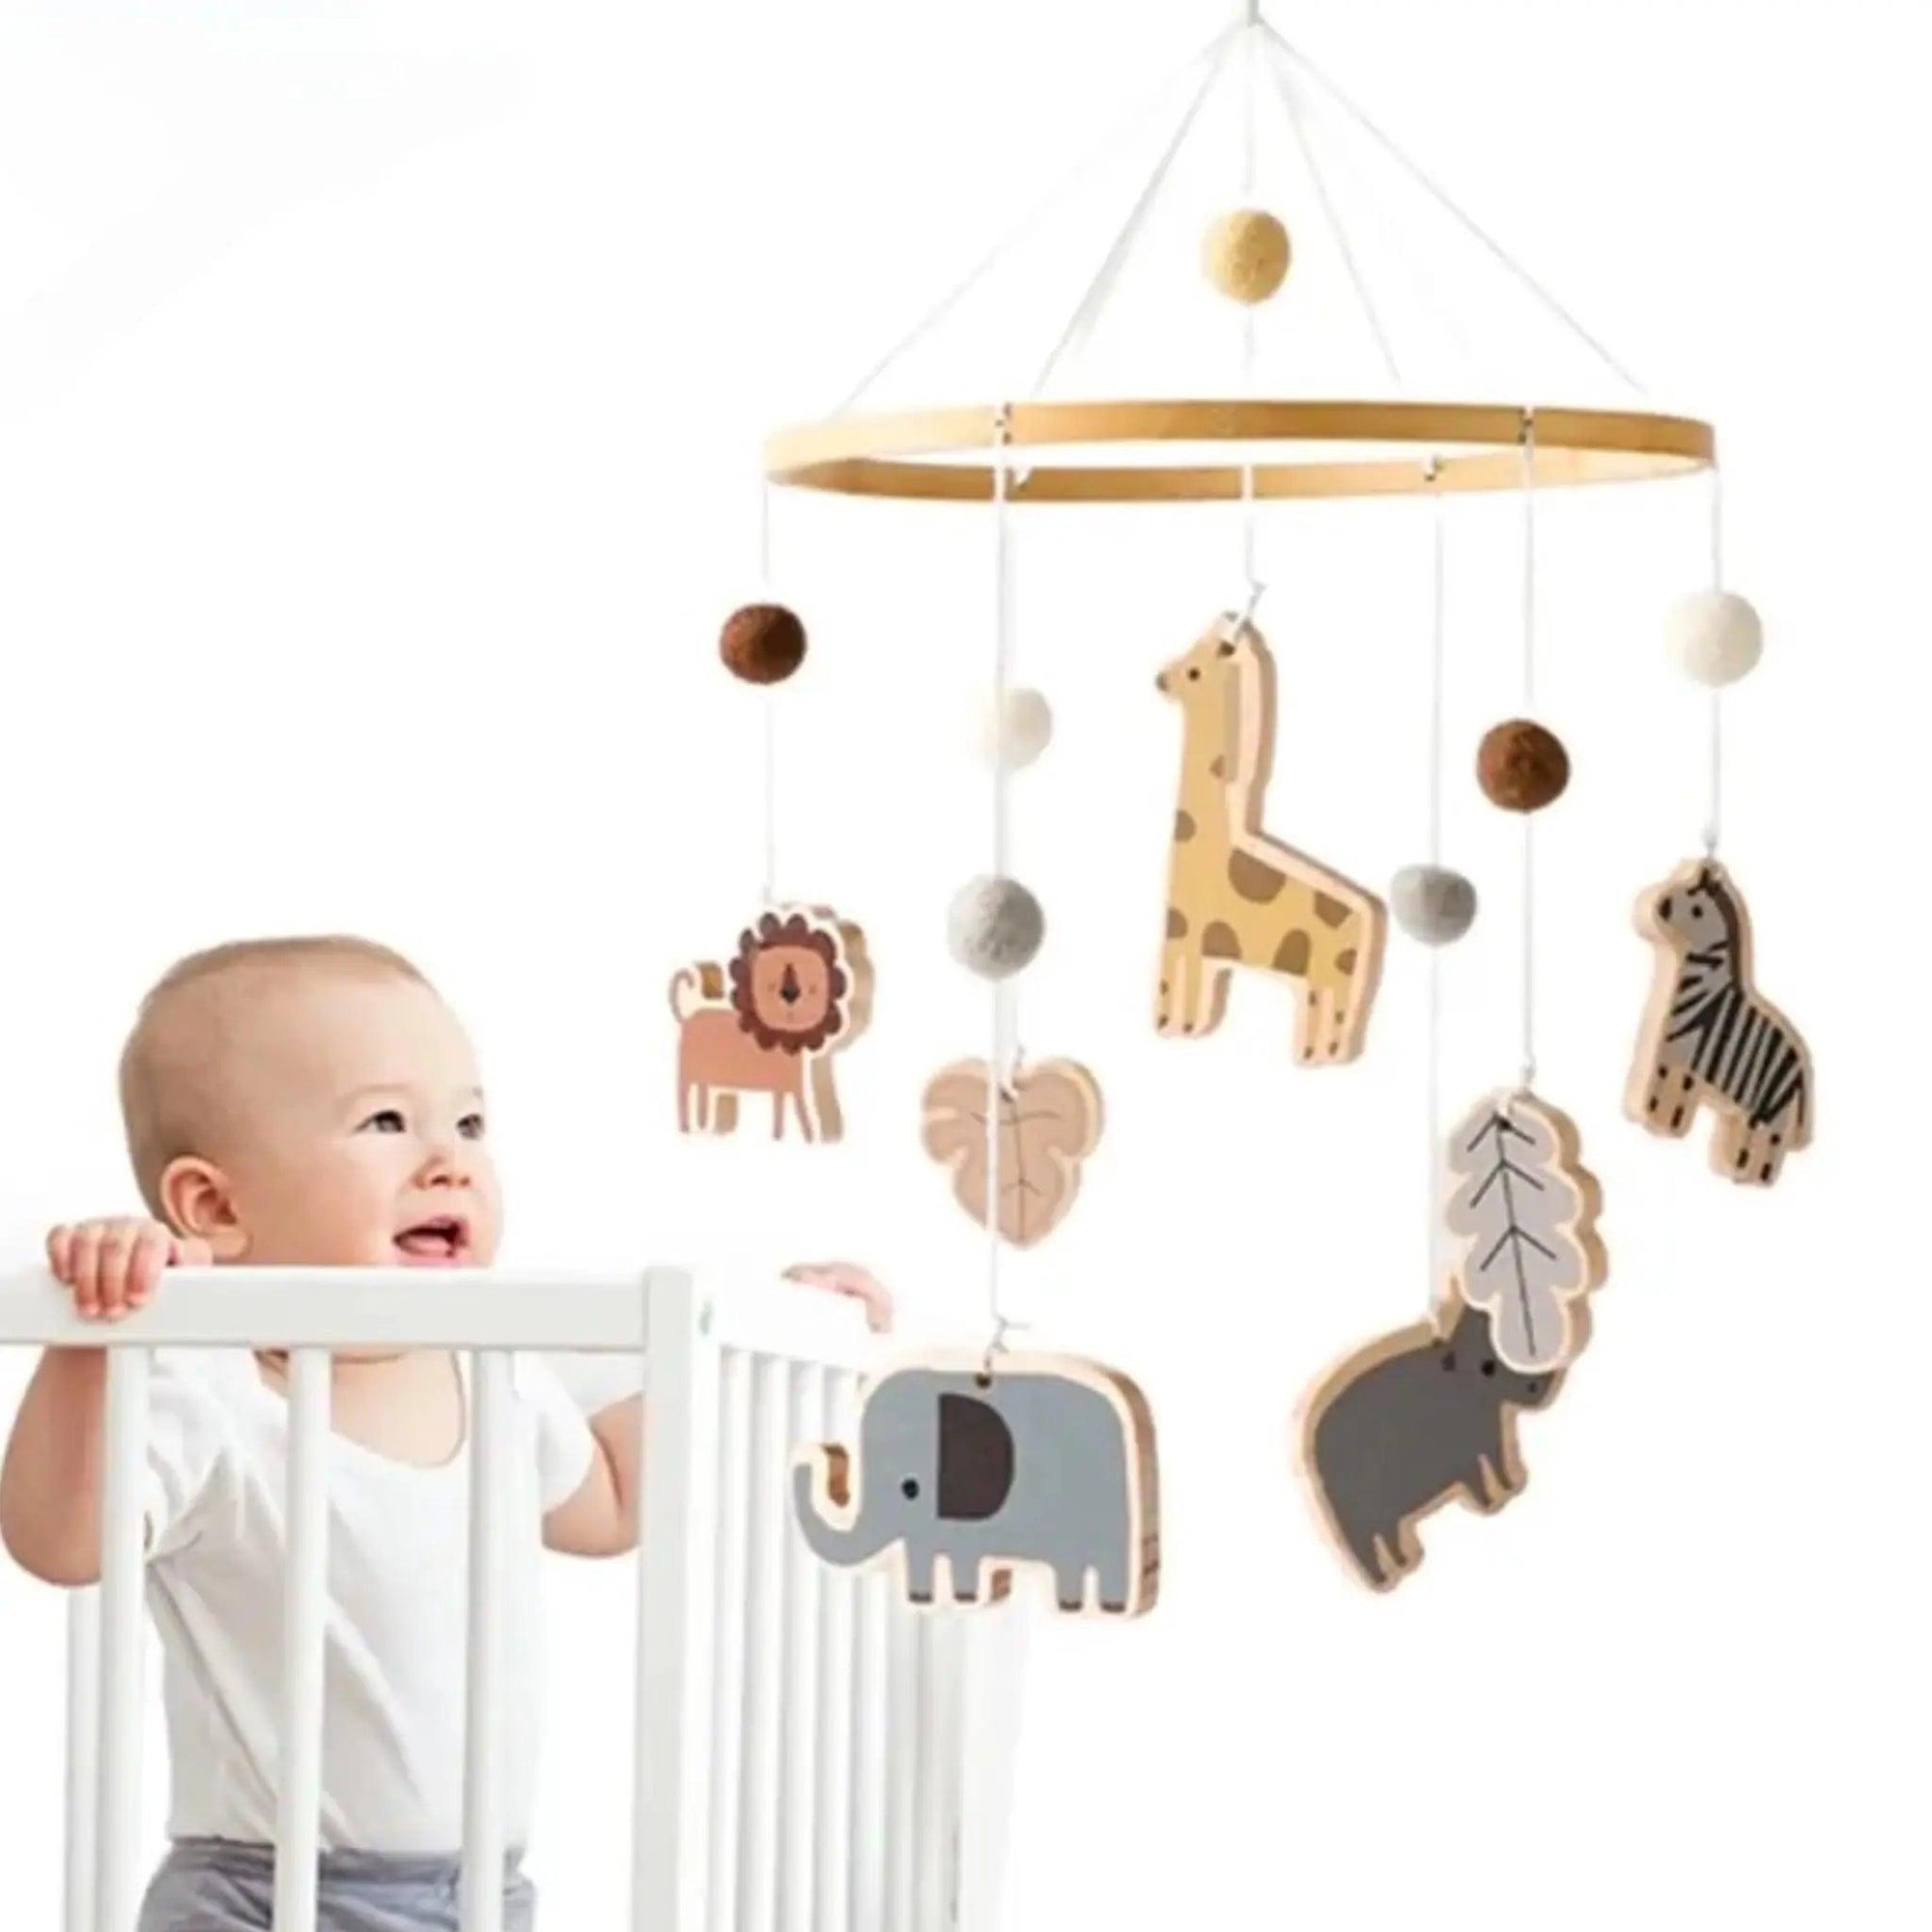 Animal Theme Wooden Crib Mobile Hanging Toy Rattles for Nursery Bling Bling Baby Boutique